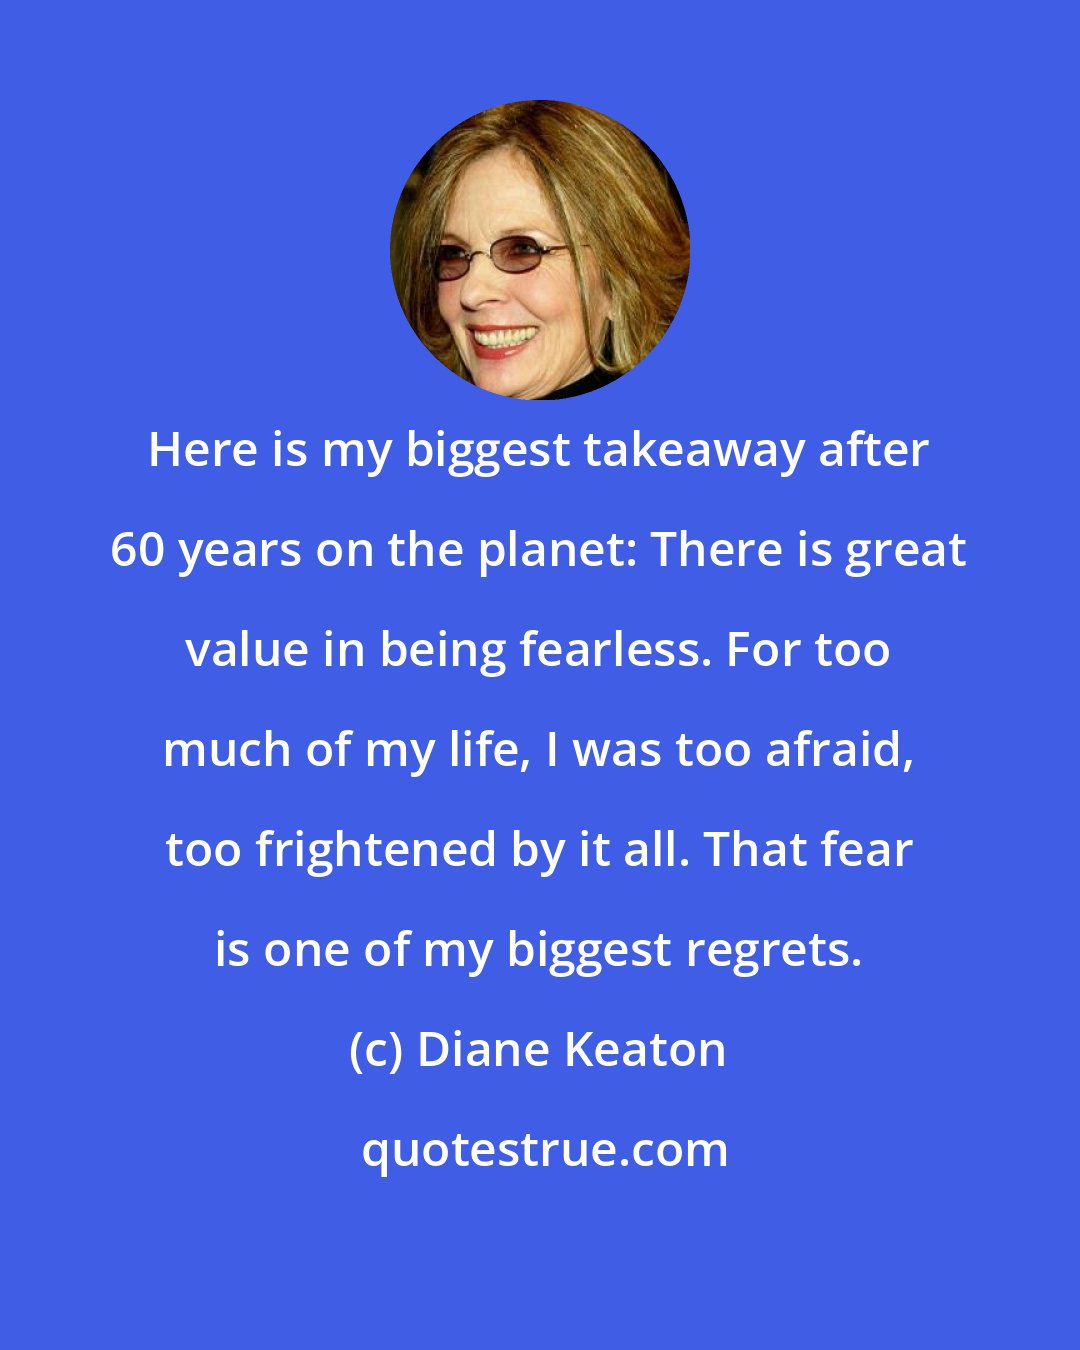 Diane Keaton: Here is my biggest takeaway after 60 years on the planet: There is great value in being fearless. For too much of my life, I was too afraid, too frightened by it all. That fear is one of my biggest regrets.